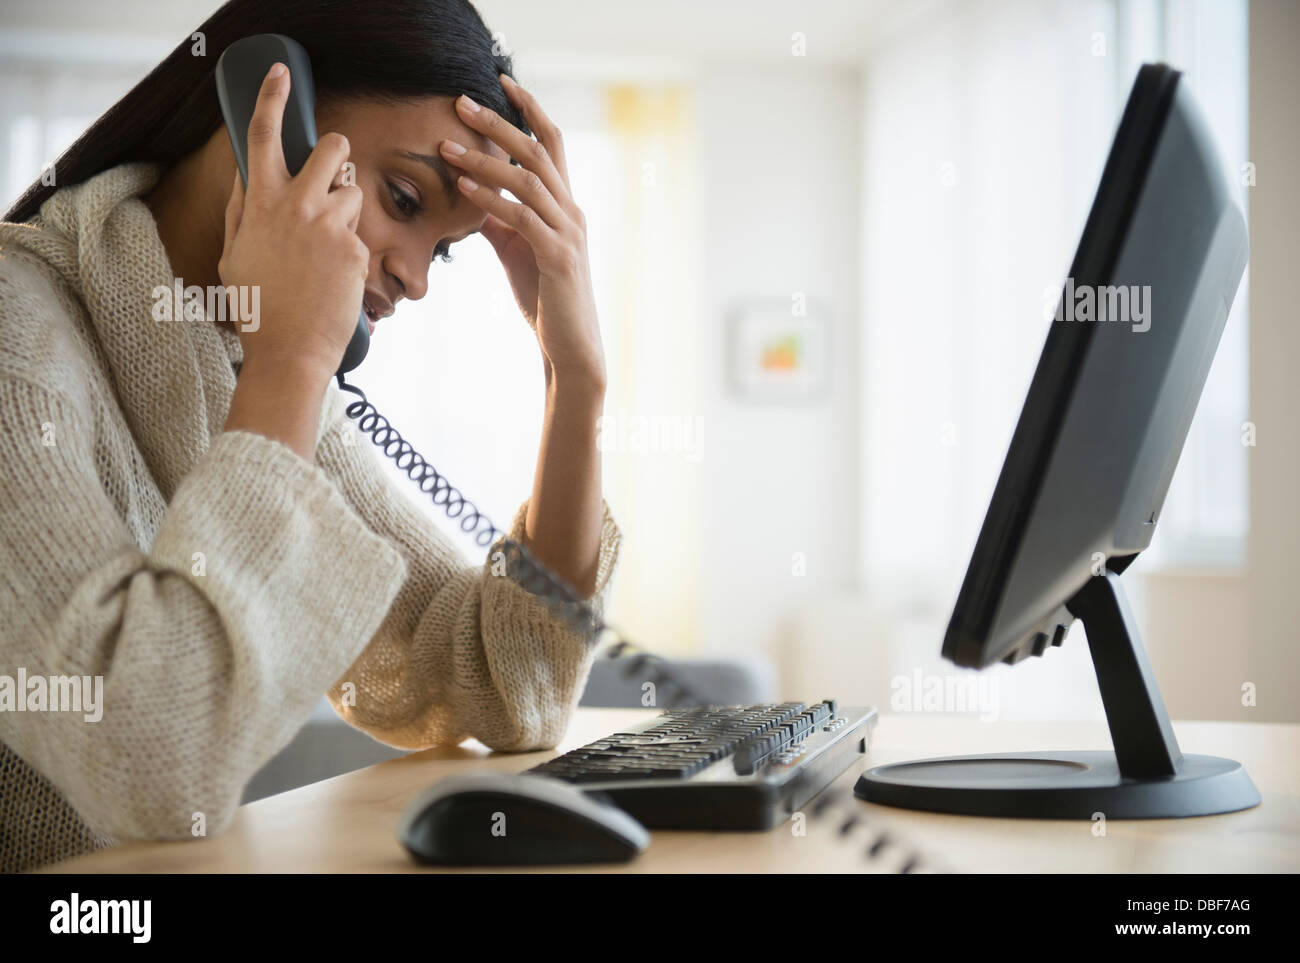 Mixed Race Woman talking on phone at desk Banque D'Images